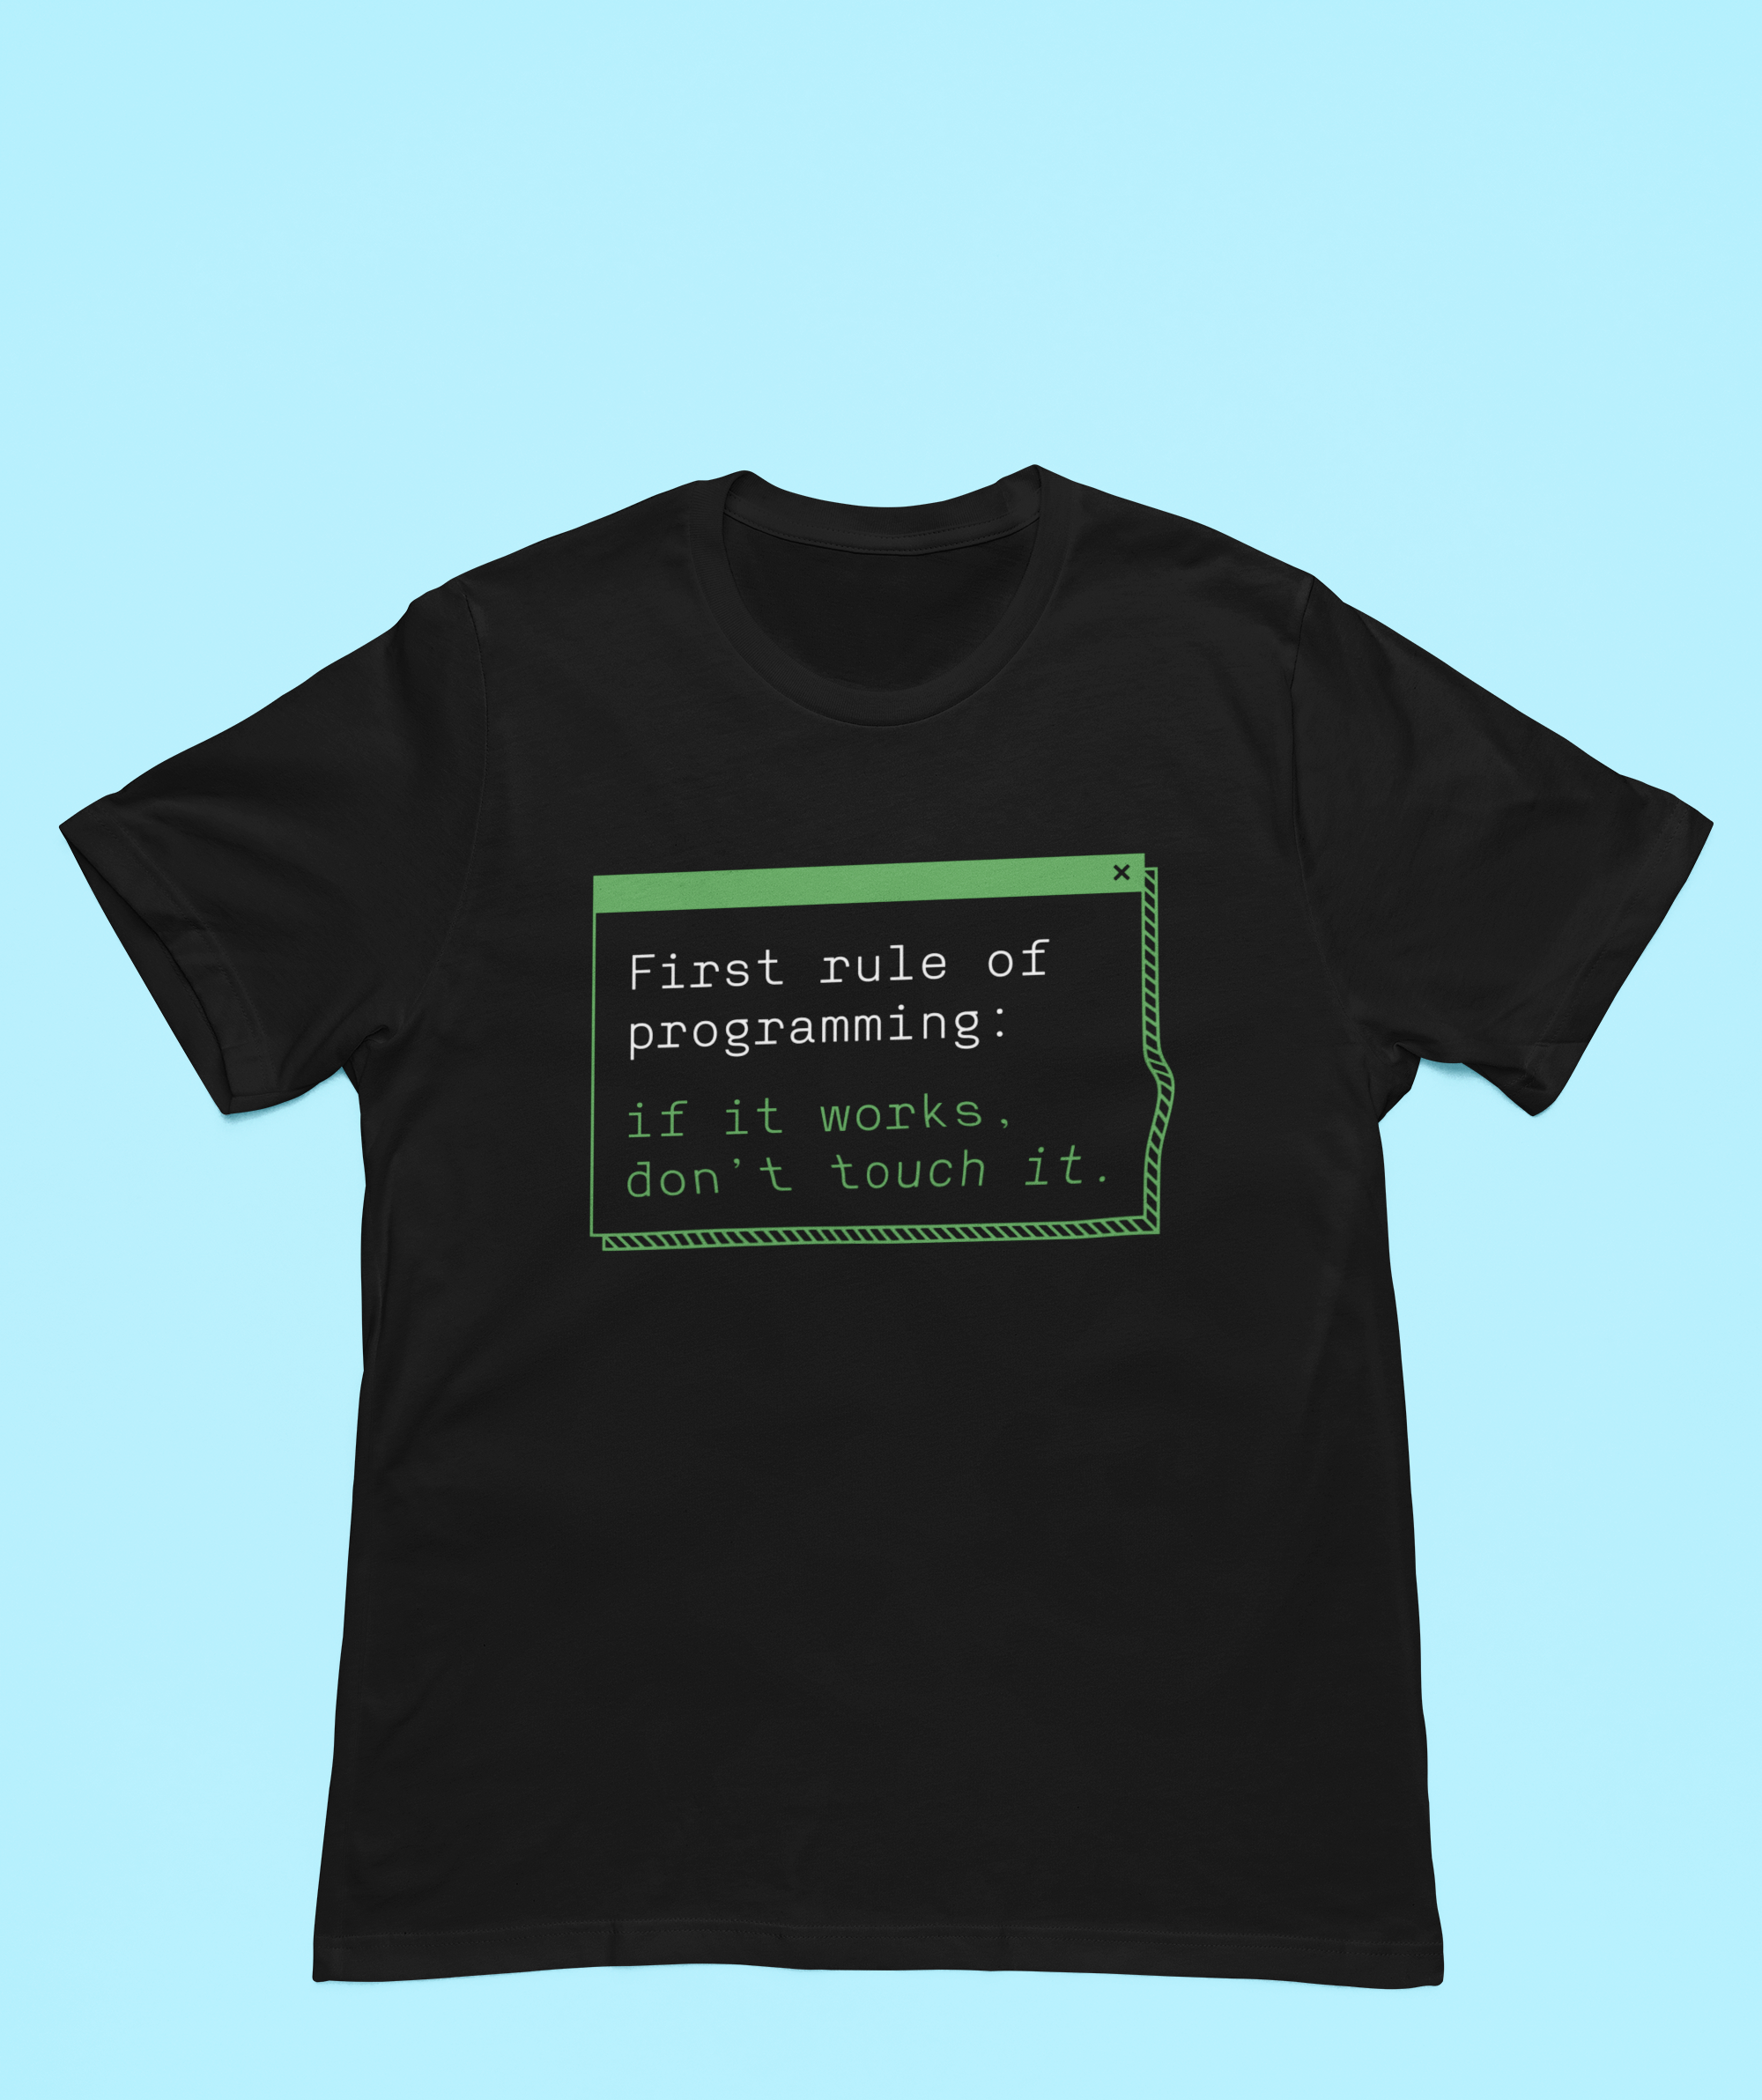 First Role of Programming T-Shirt with a green computer terminal design that reads "first rule of programming: if it works, don't touch it," perfect for the tech-savvy coder.